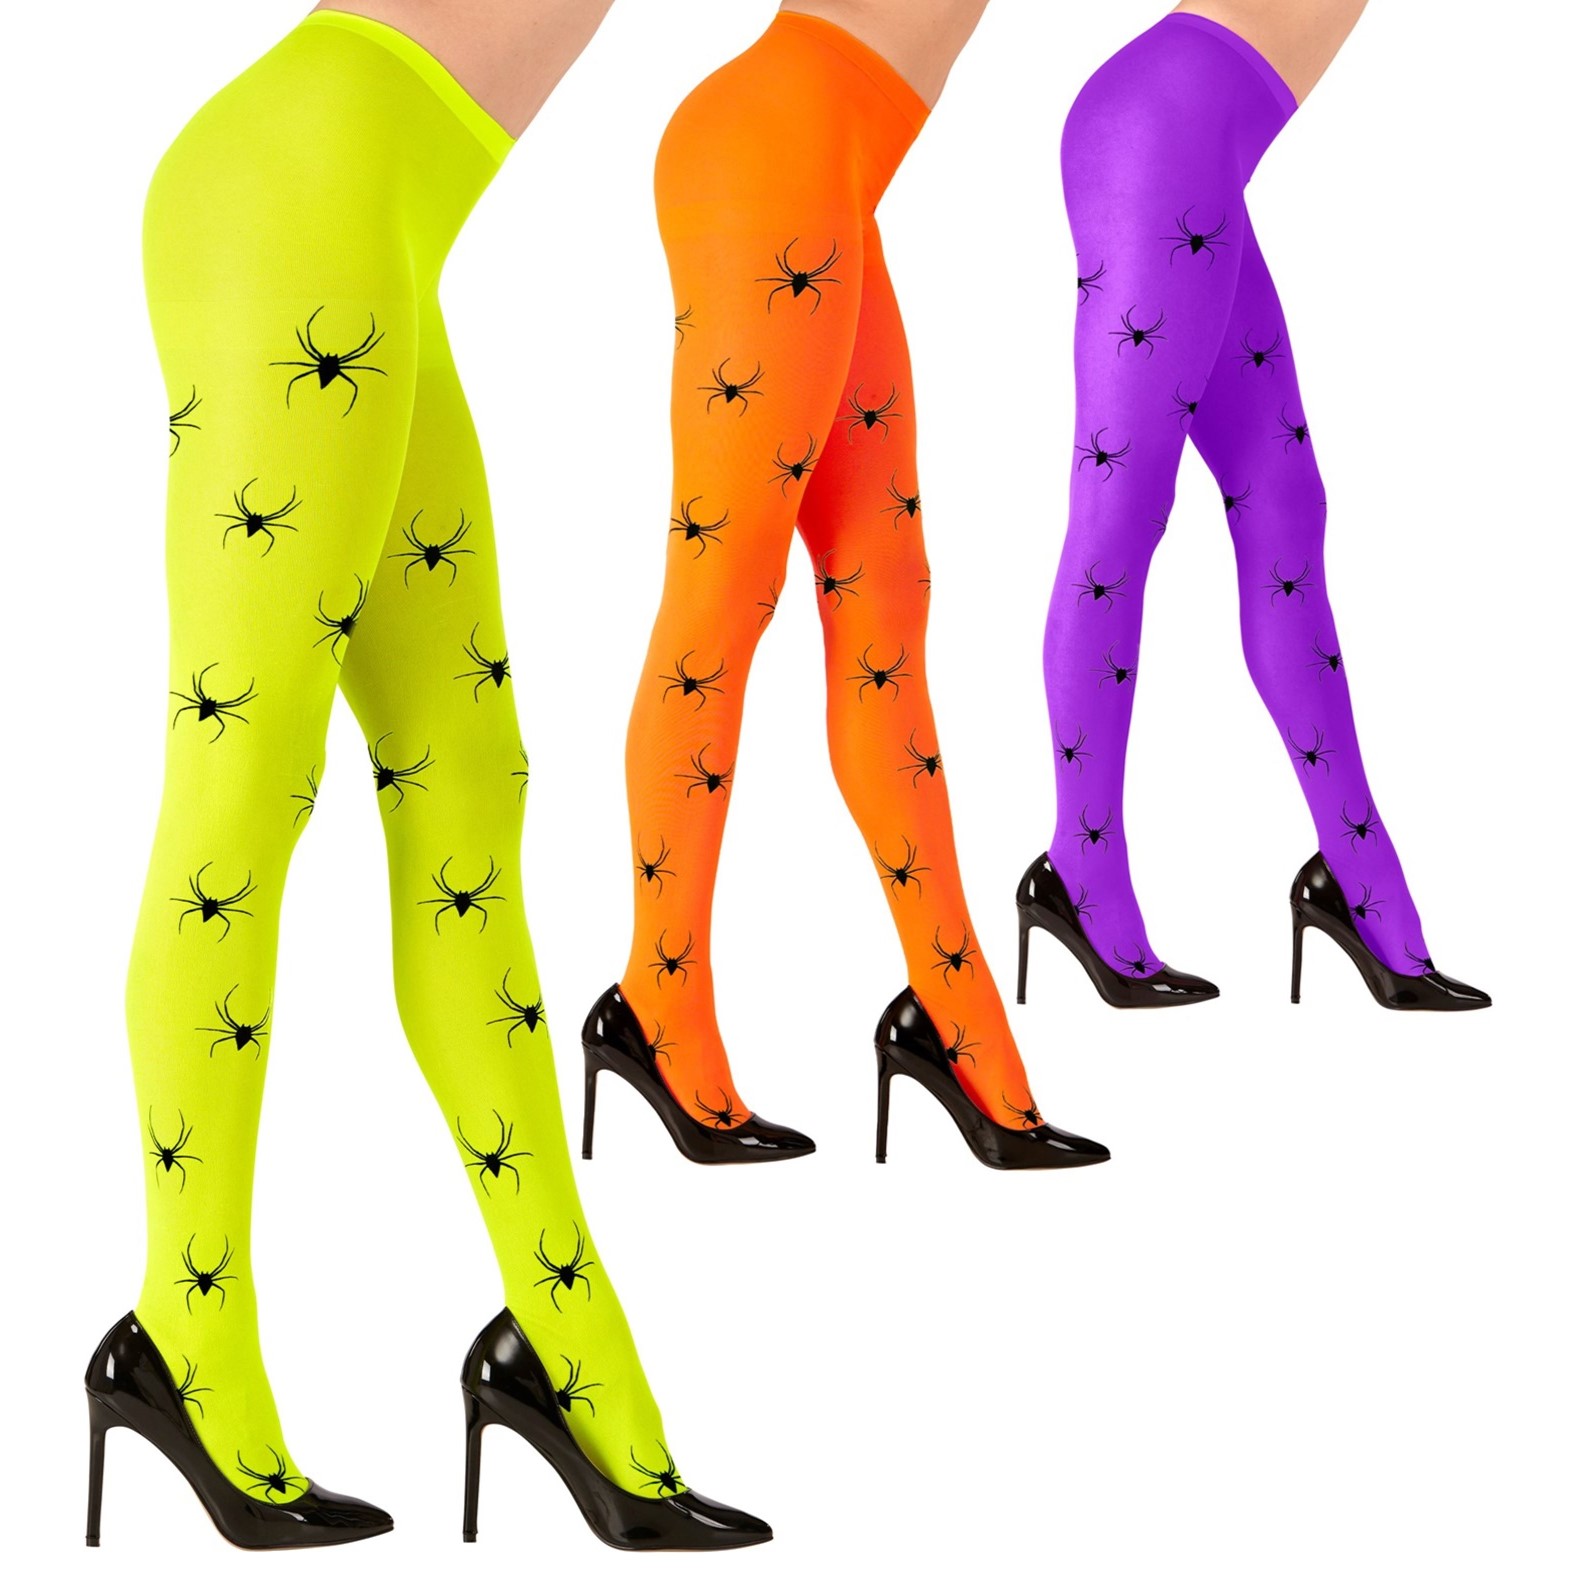 NEON TIGHTS WITH SPIDERS